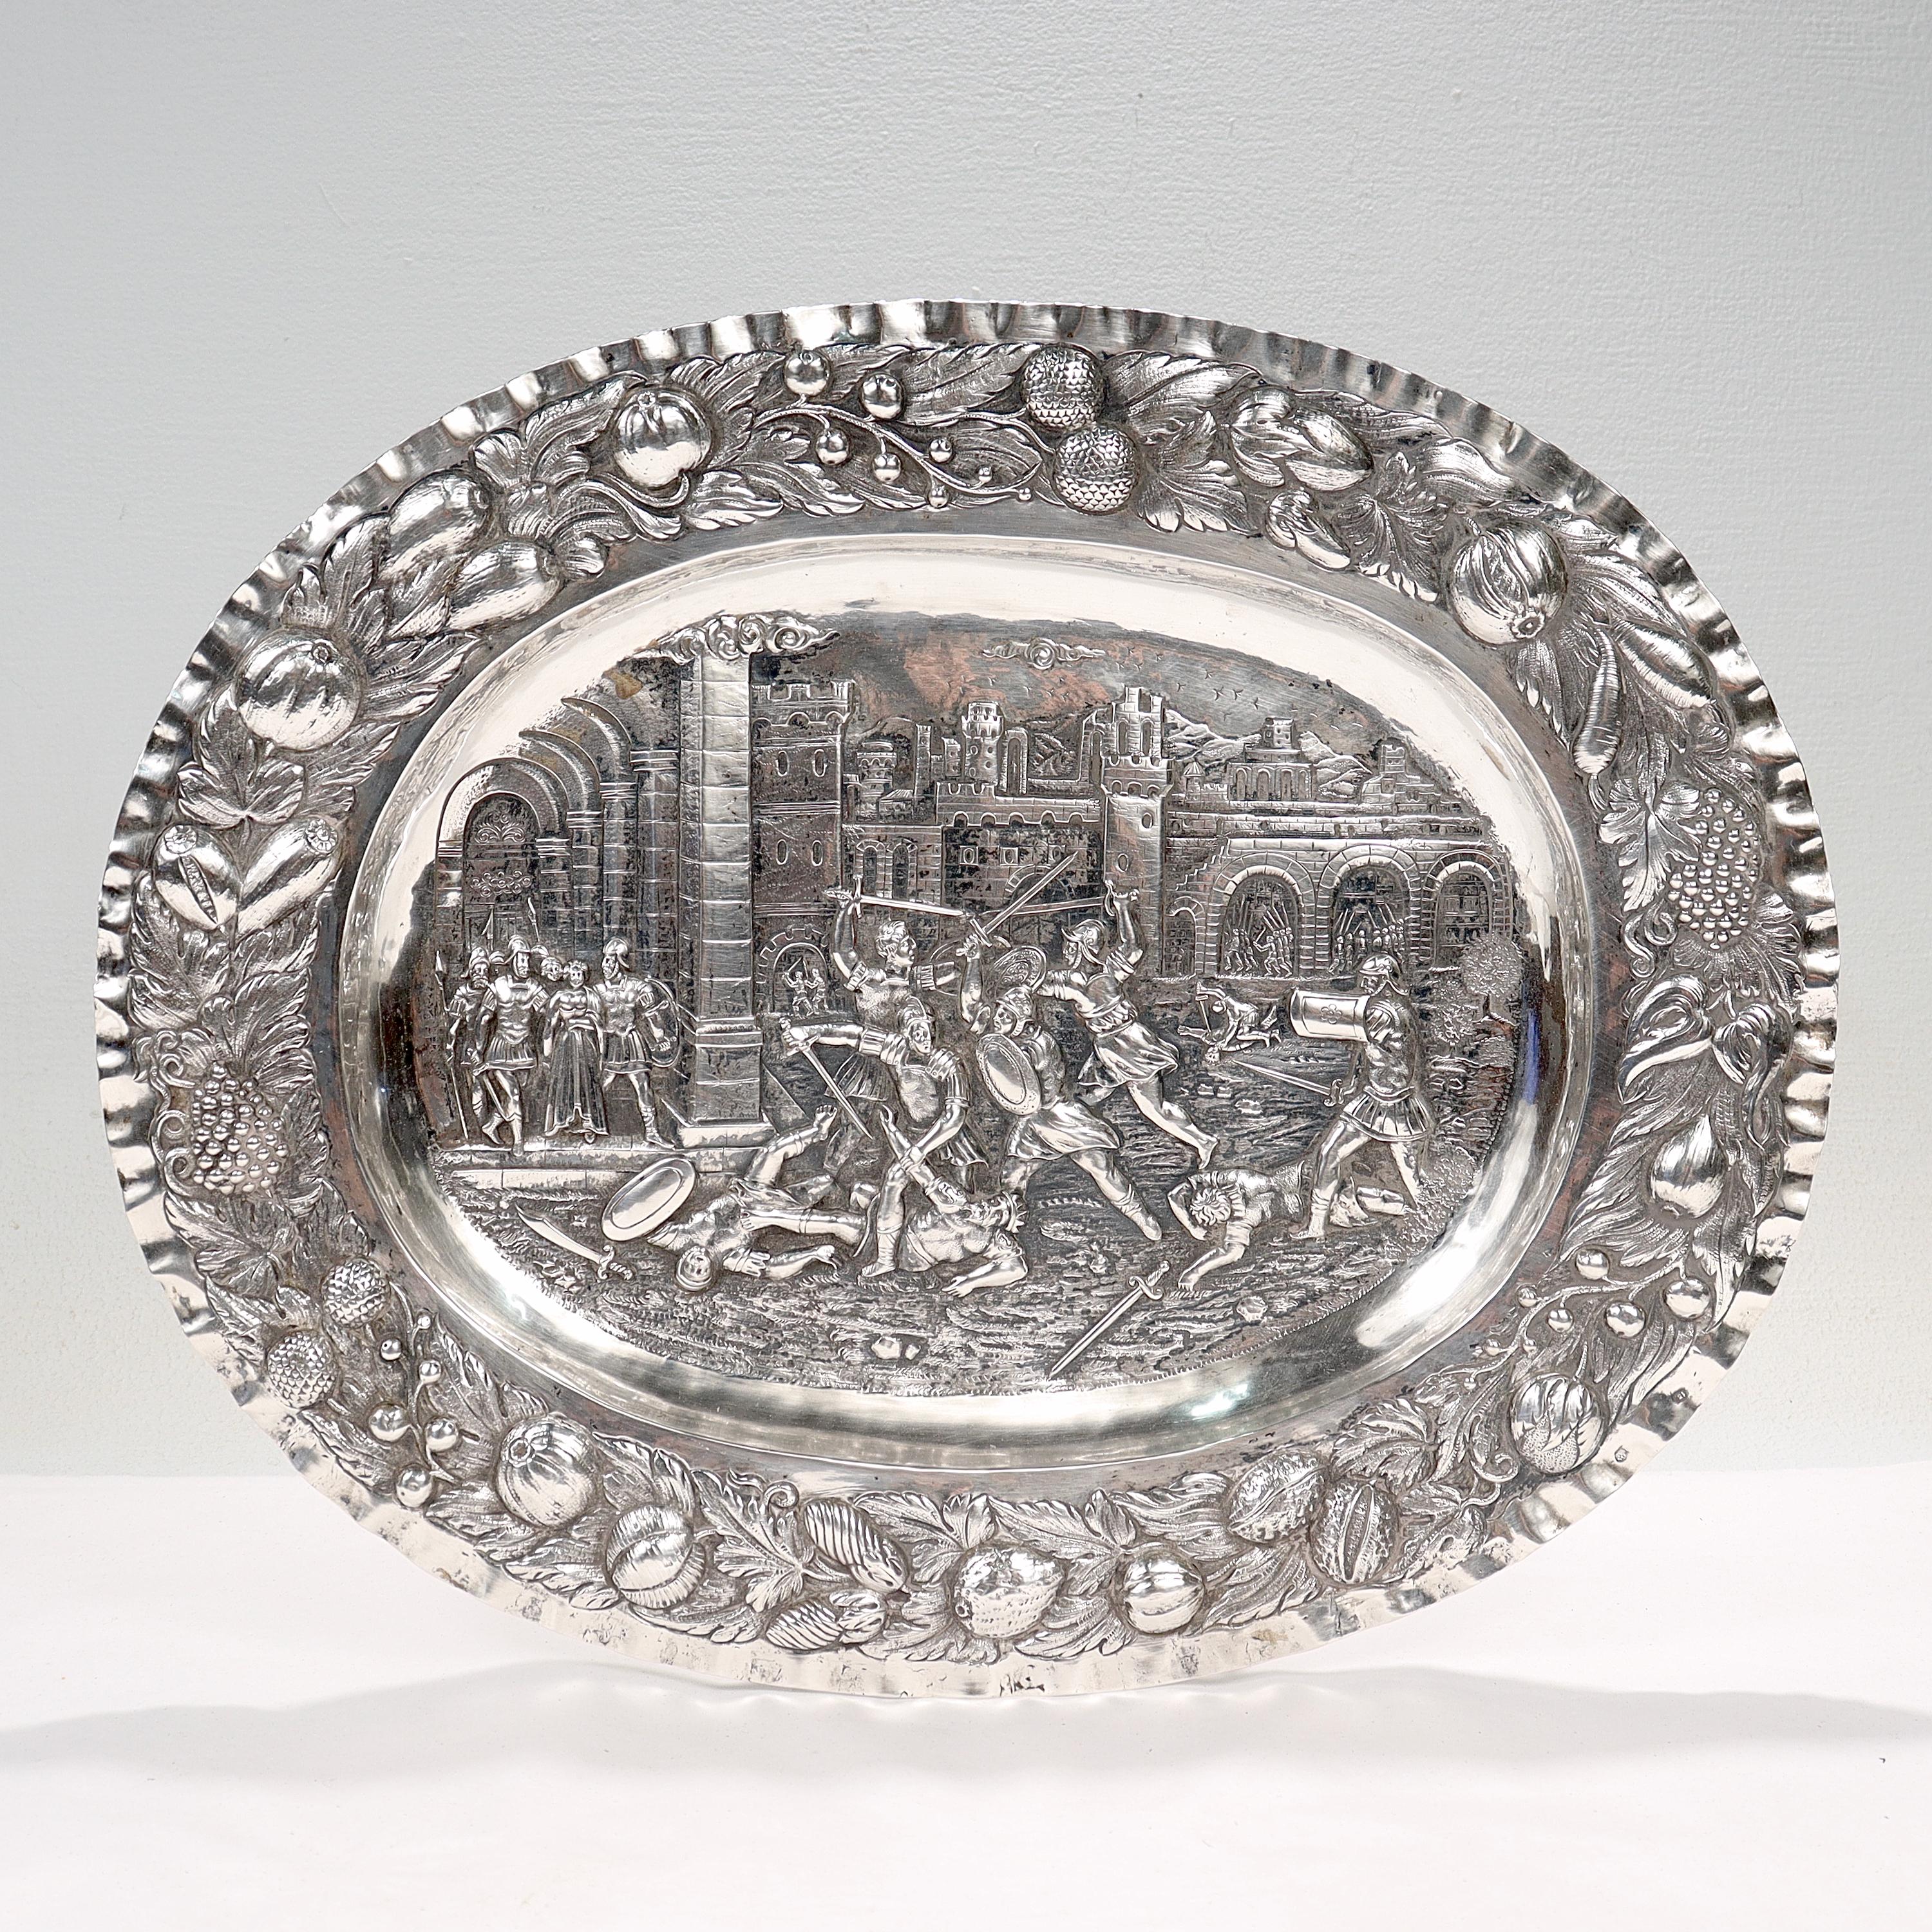 A fine antique Renaissance Revival German silver tray or charger.

In .800 silver.

Decorated with a repoussé battle scene. Soldiers are depicted battling one another within the walls of a Renaissance era city, with two regal looking women being